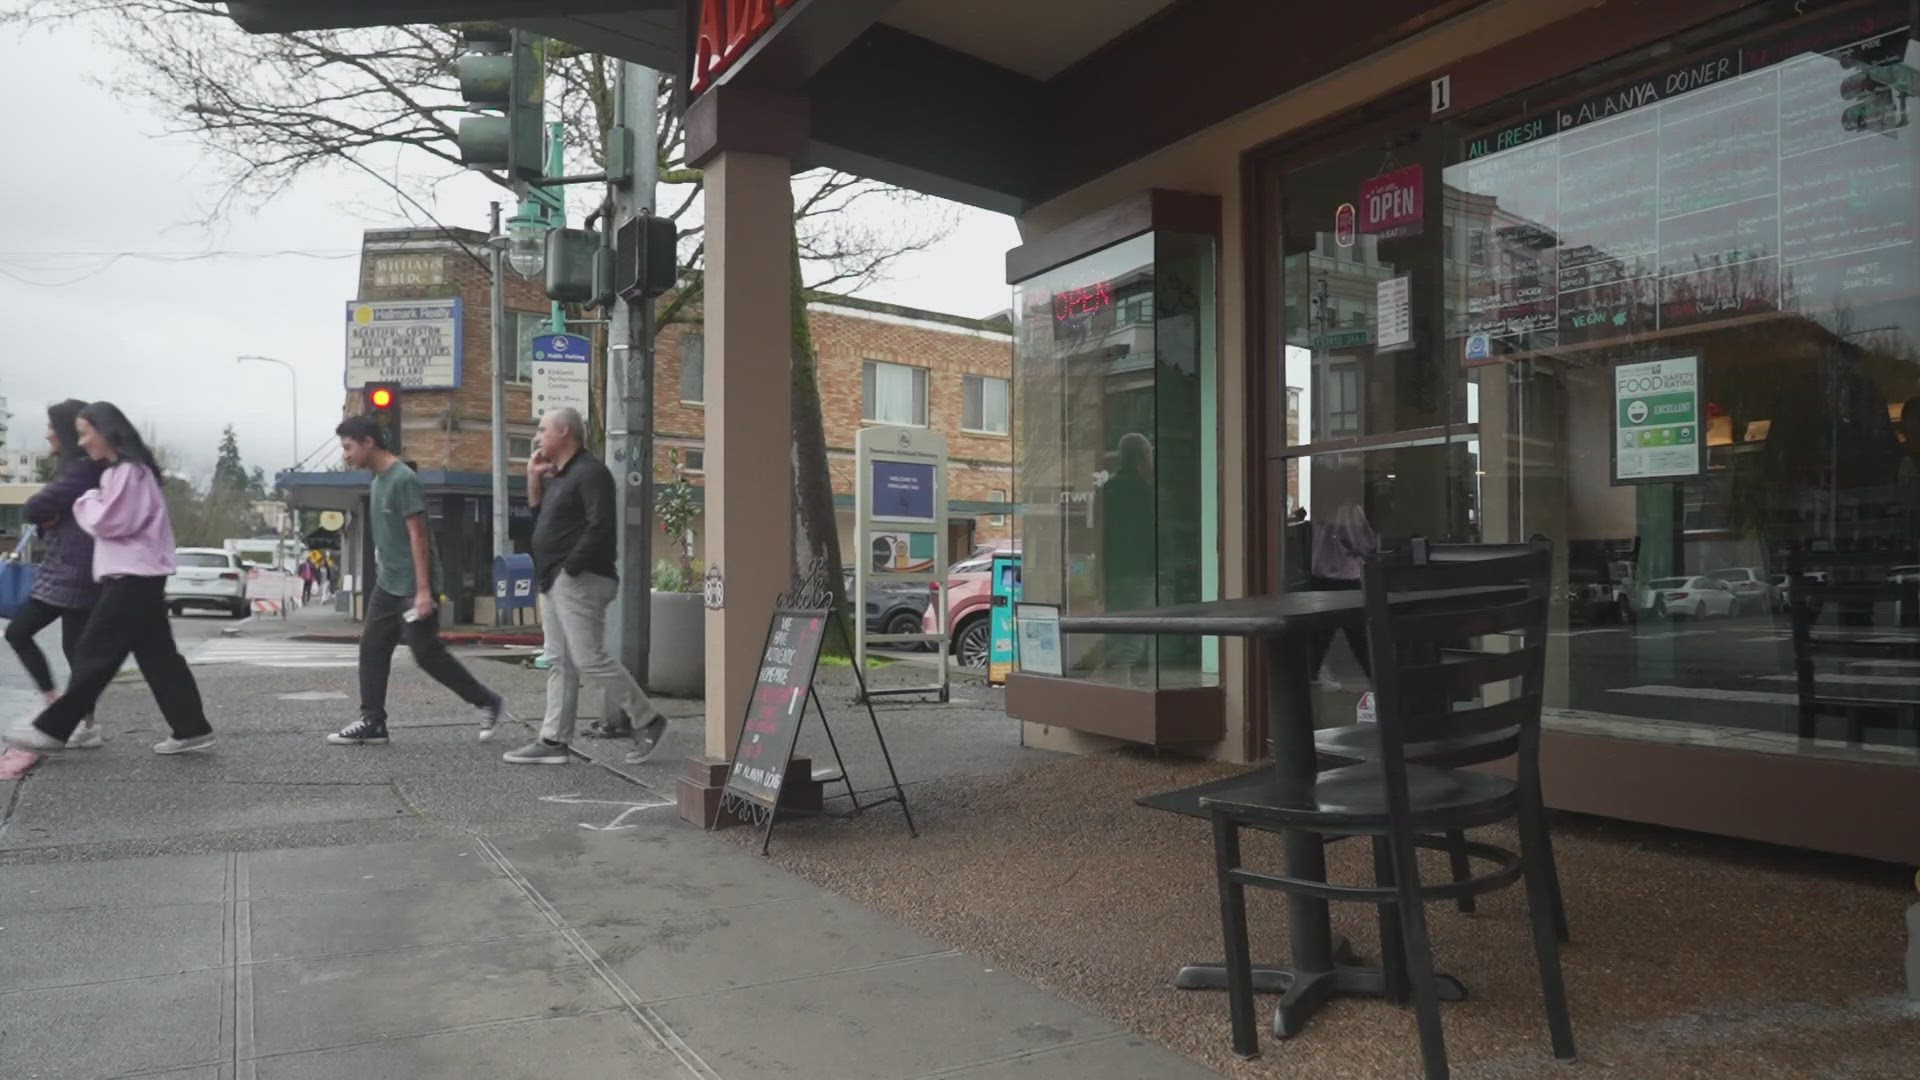 The 8-week closure is for the construction of a pedestrian-friendly intersection. However, nearby businesses worry the closure could mean a major loss of customers.